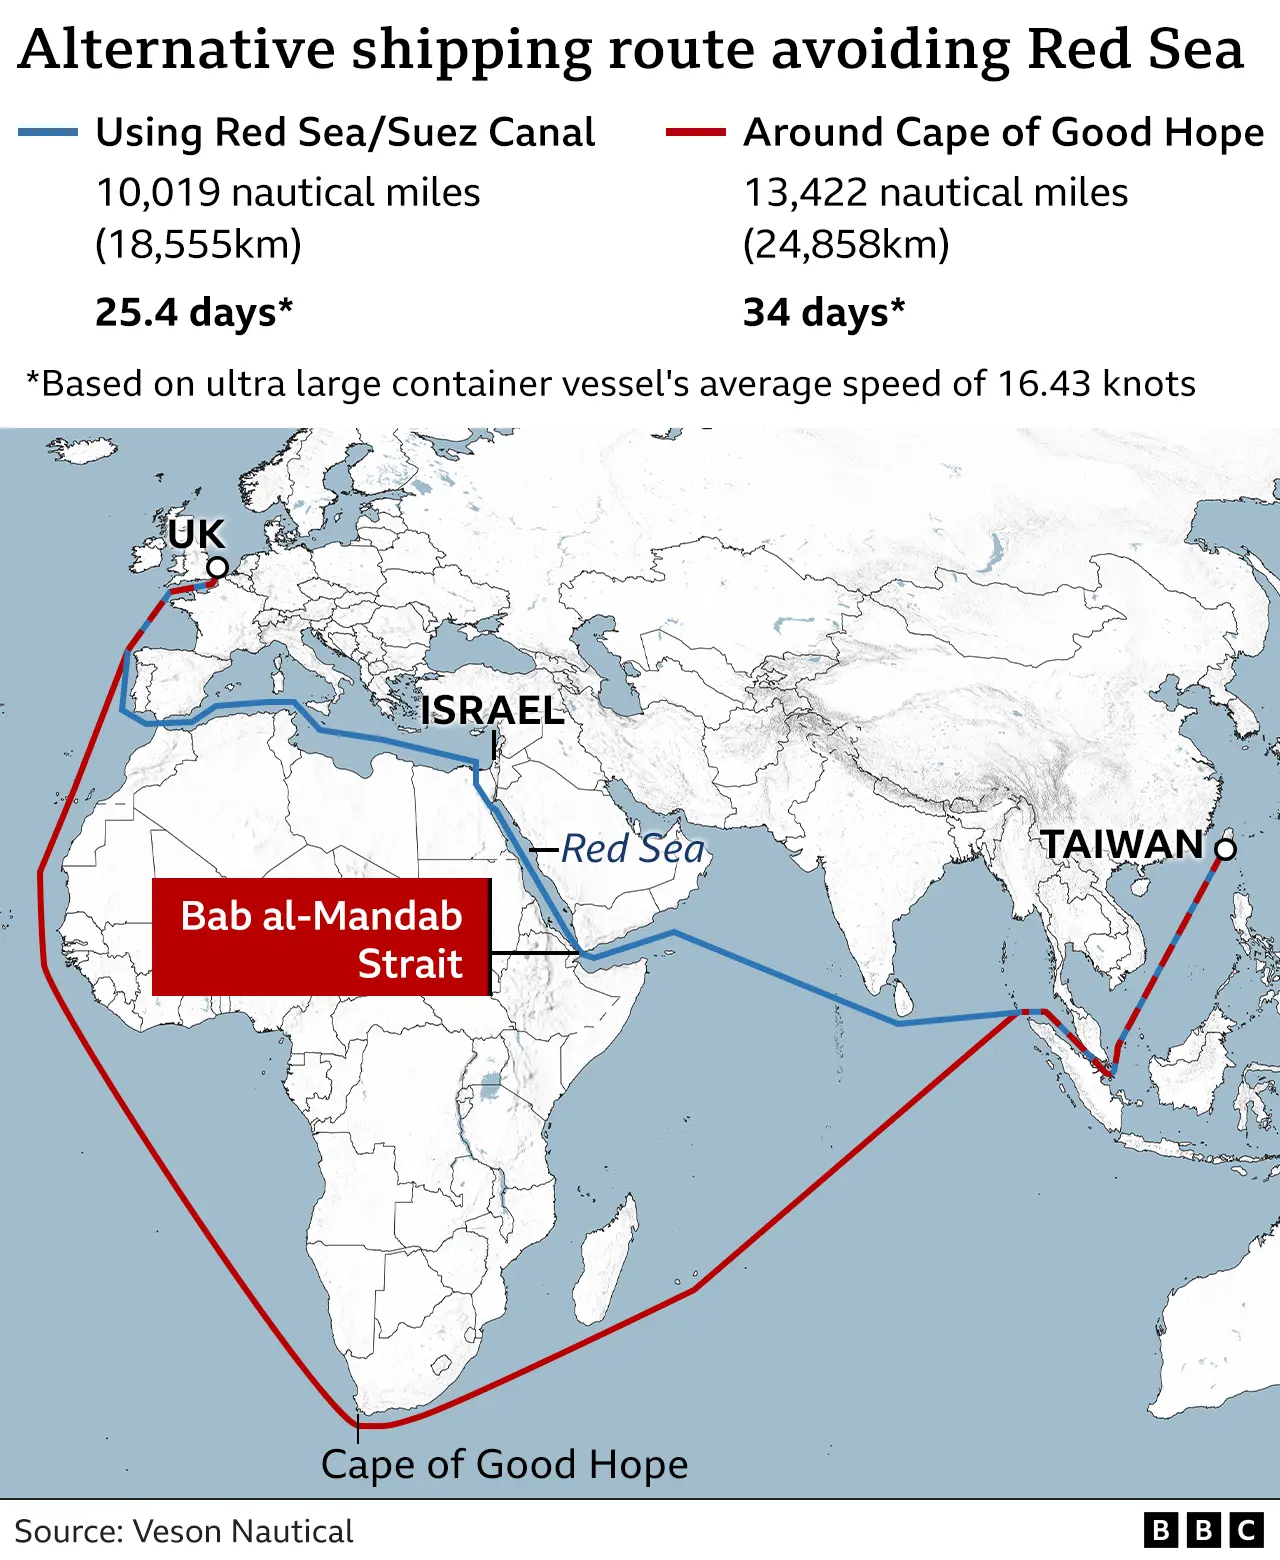 What do Red Sea assaults mean for global trade?